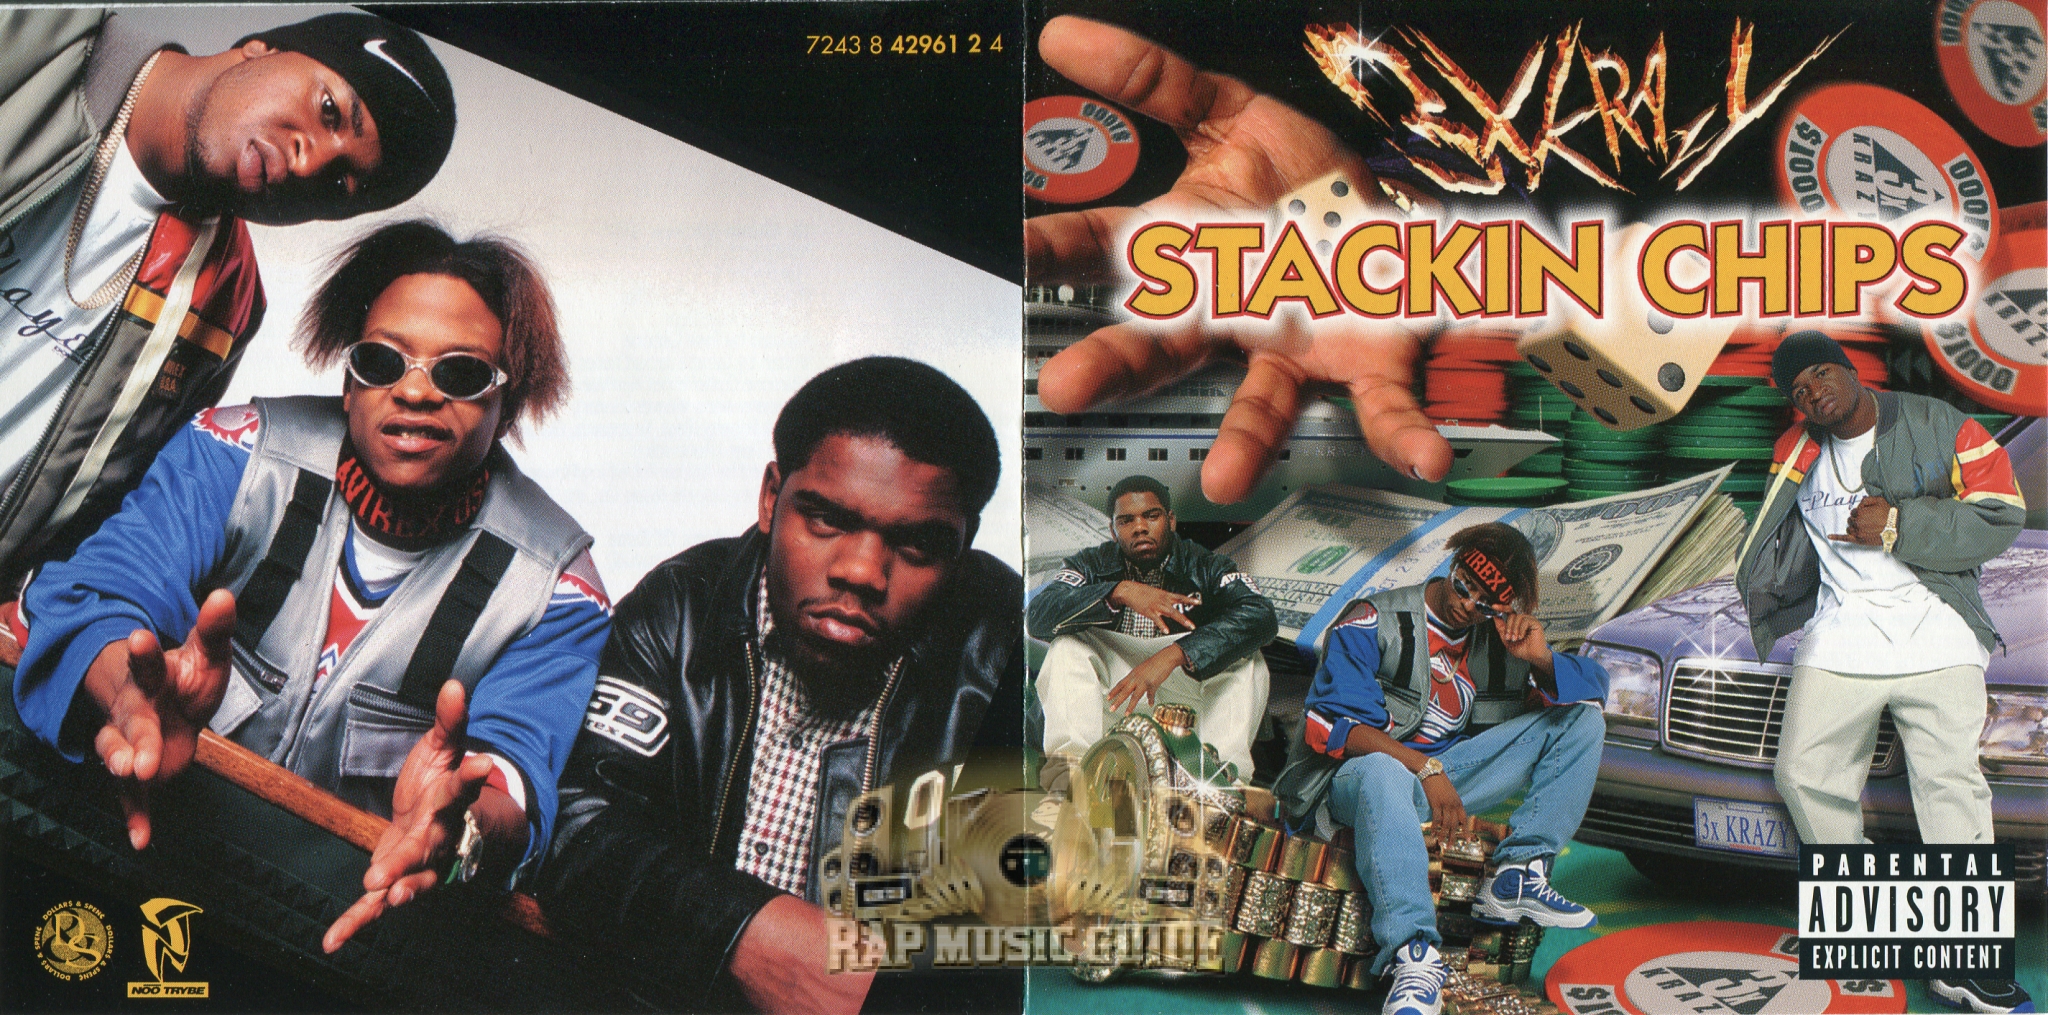 3X Krazy - Stackin Chips: CD | Rap Music Guide